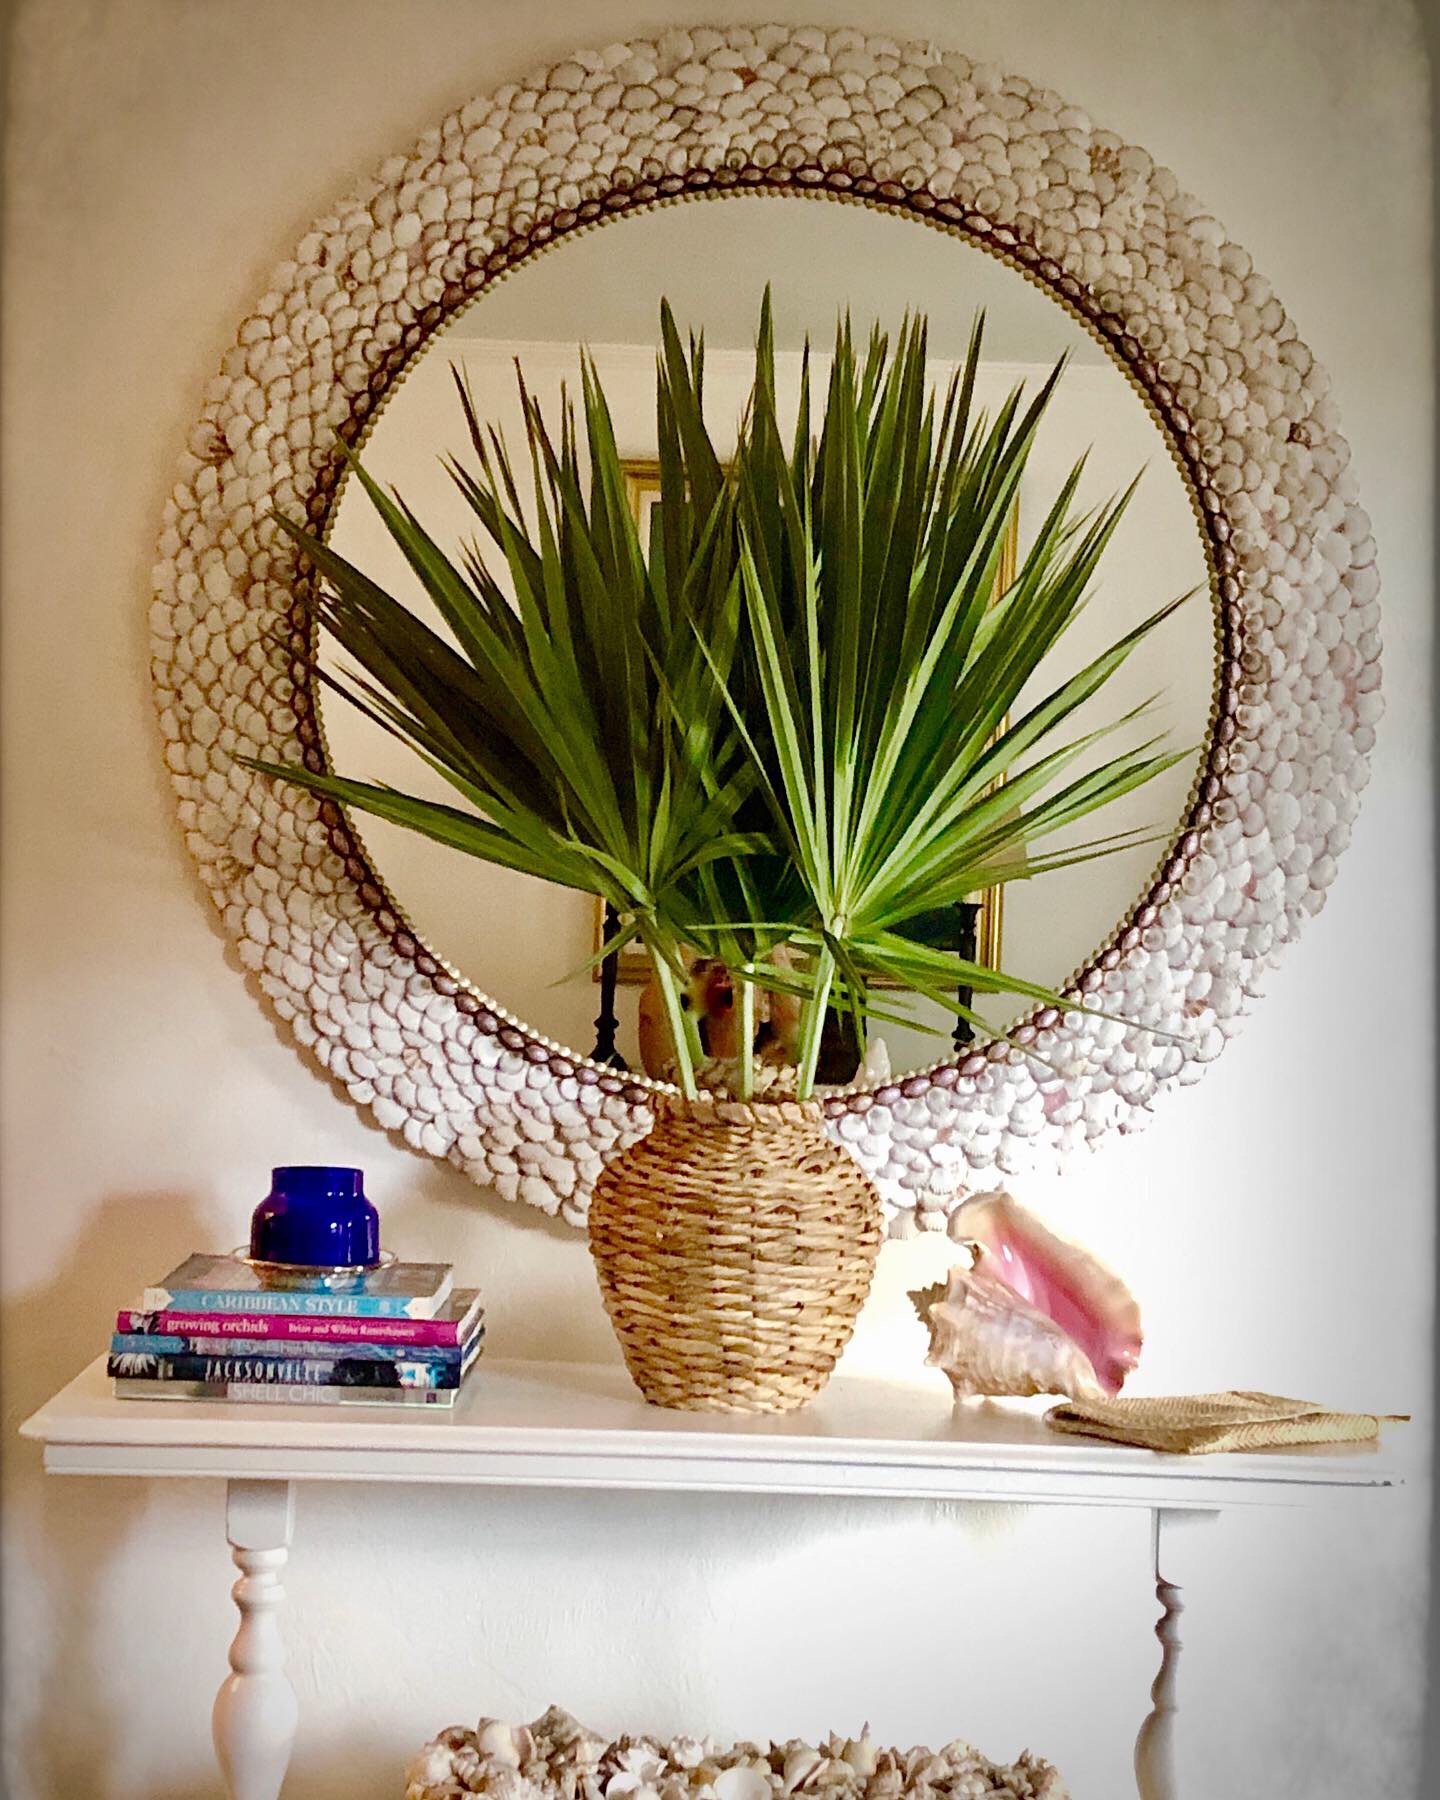 Green palm fronds in a rafia covered vase sitting on a white console table. The table also has books and a shell. A large round shell mirror hangs on the wall behind them.